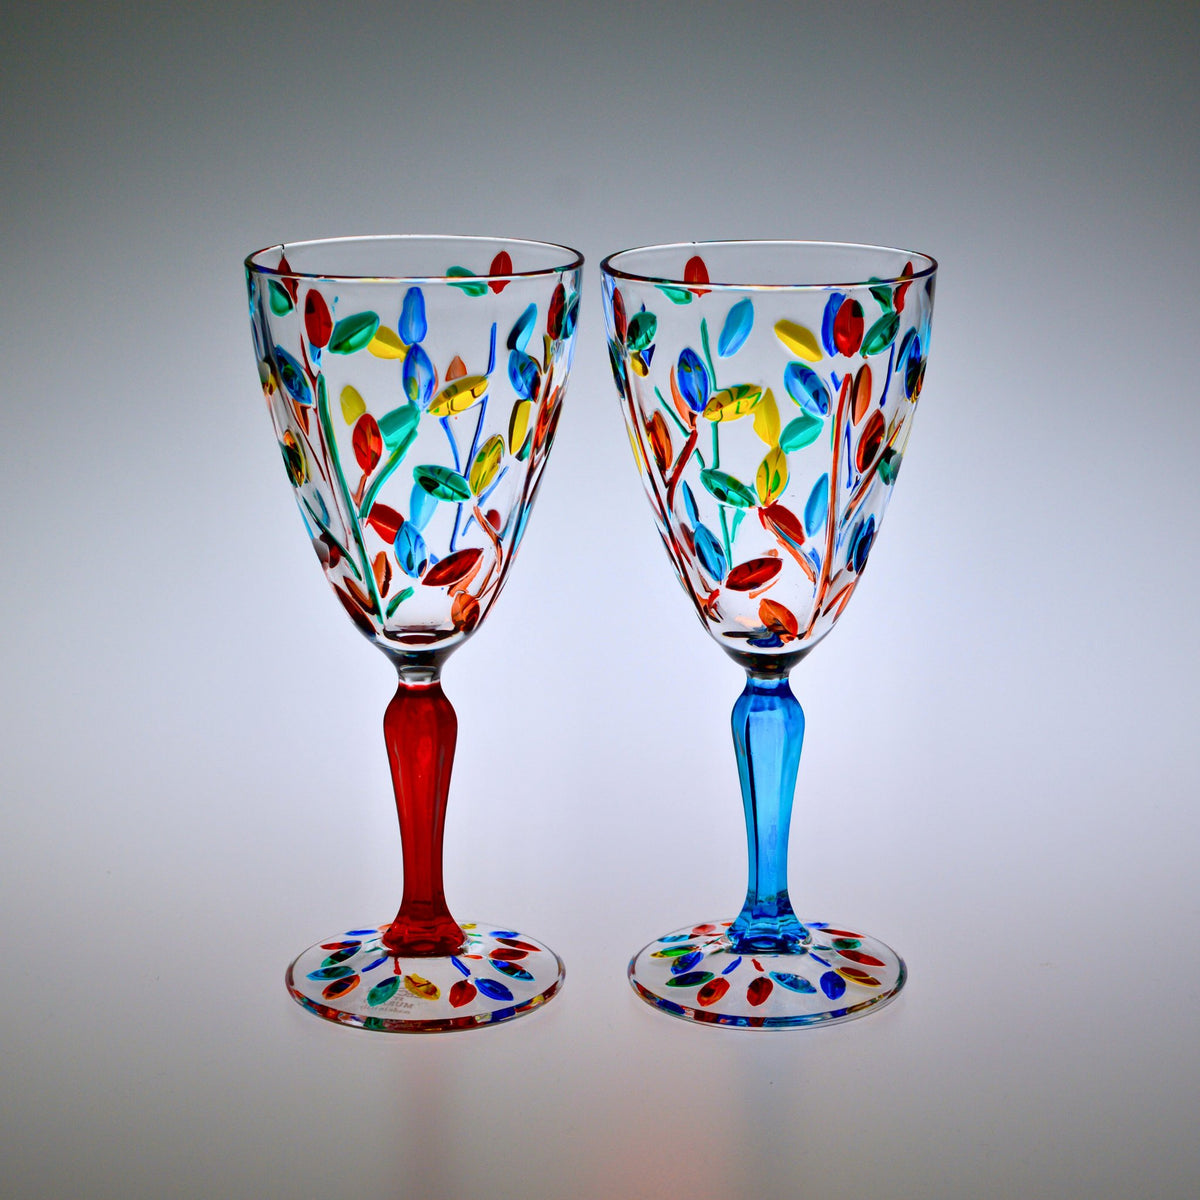 Flowervine Wine Glasses, Set of 2, Made in Italy - My Italian Decor